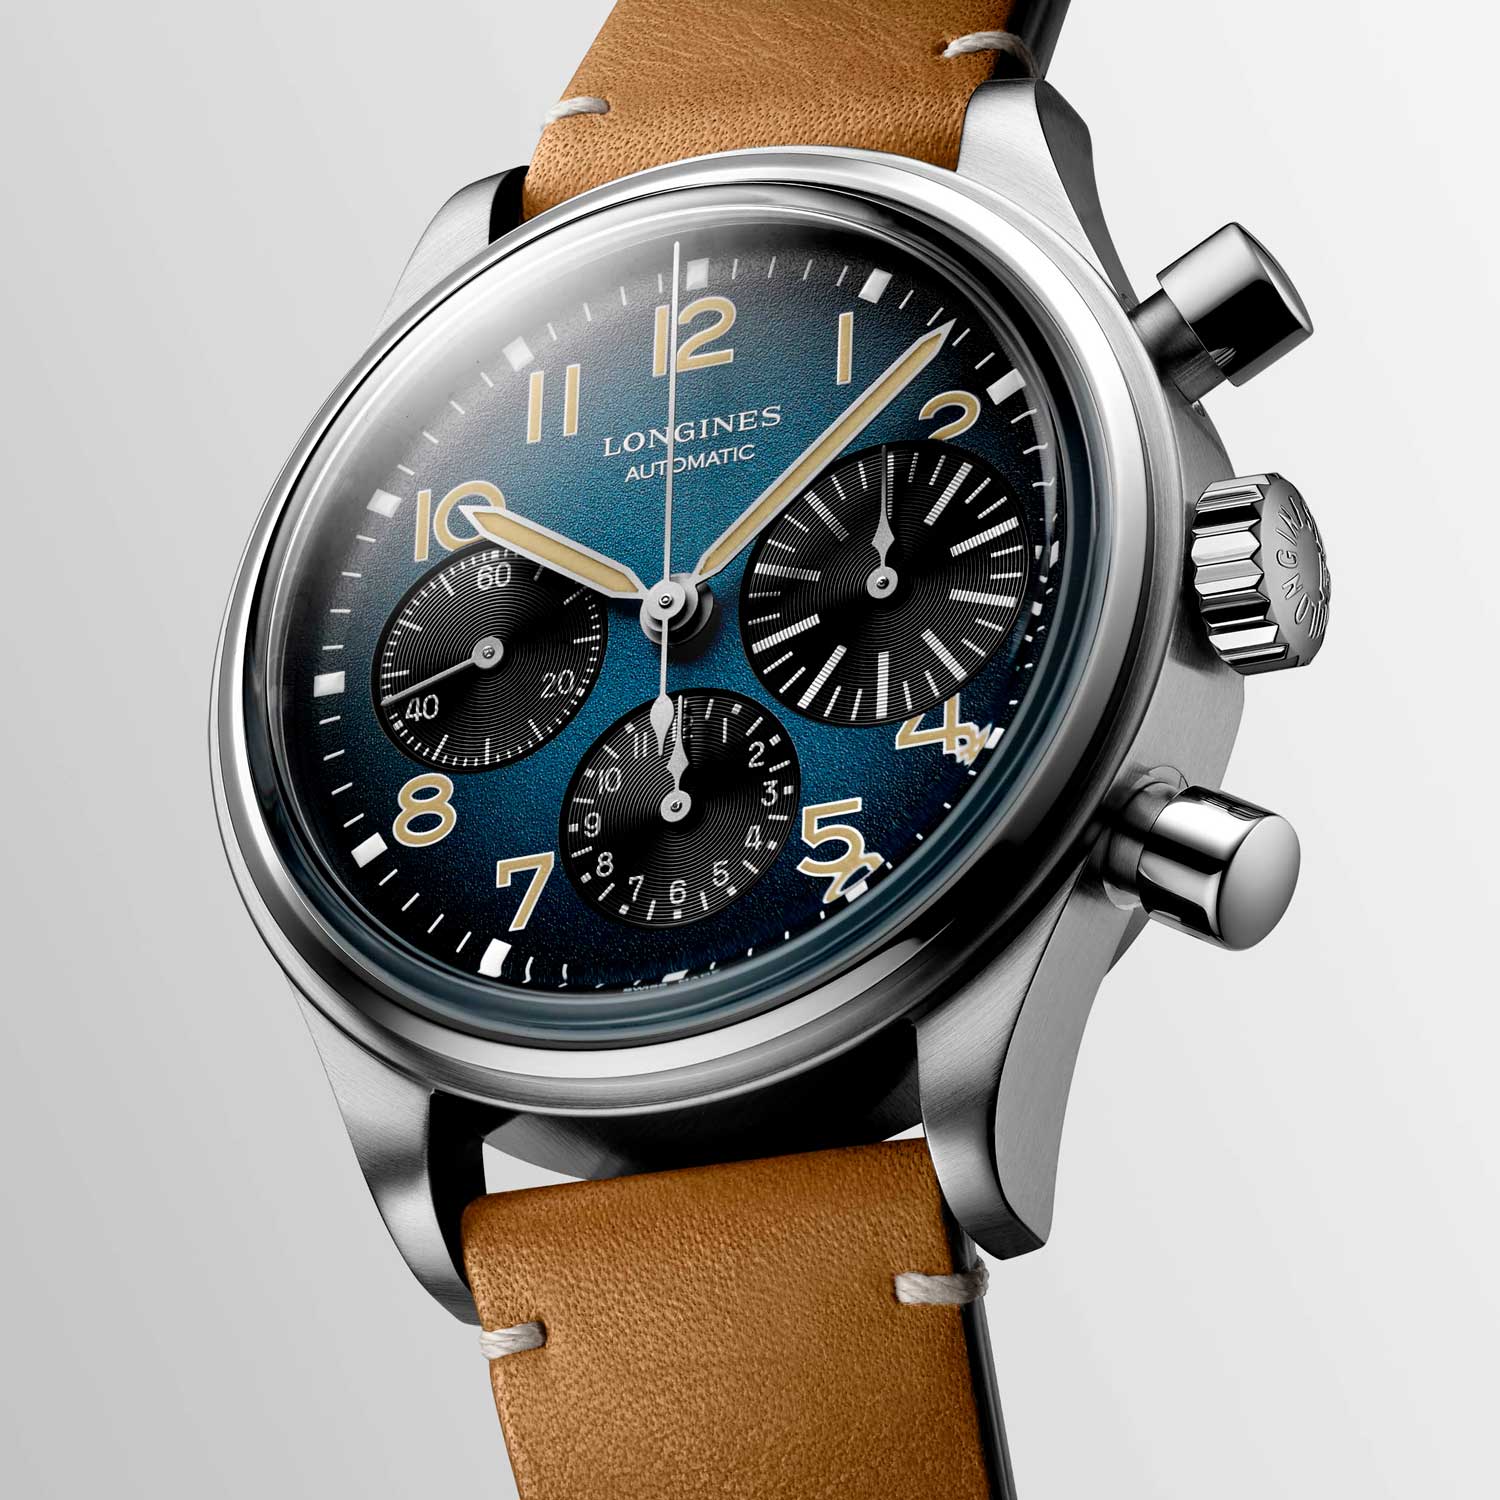 The beige numerals and black registers lend a refreshing contrast to the watch’s petrol blue dial